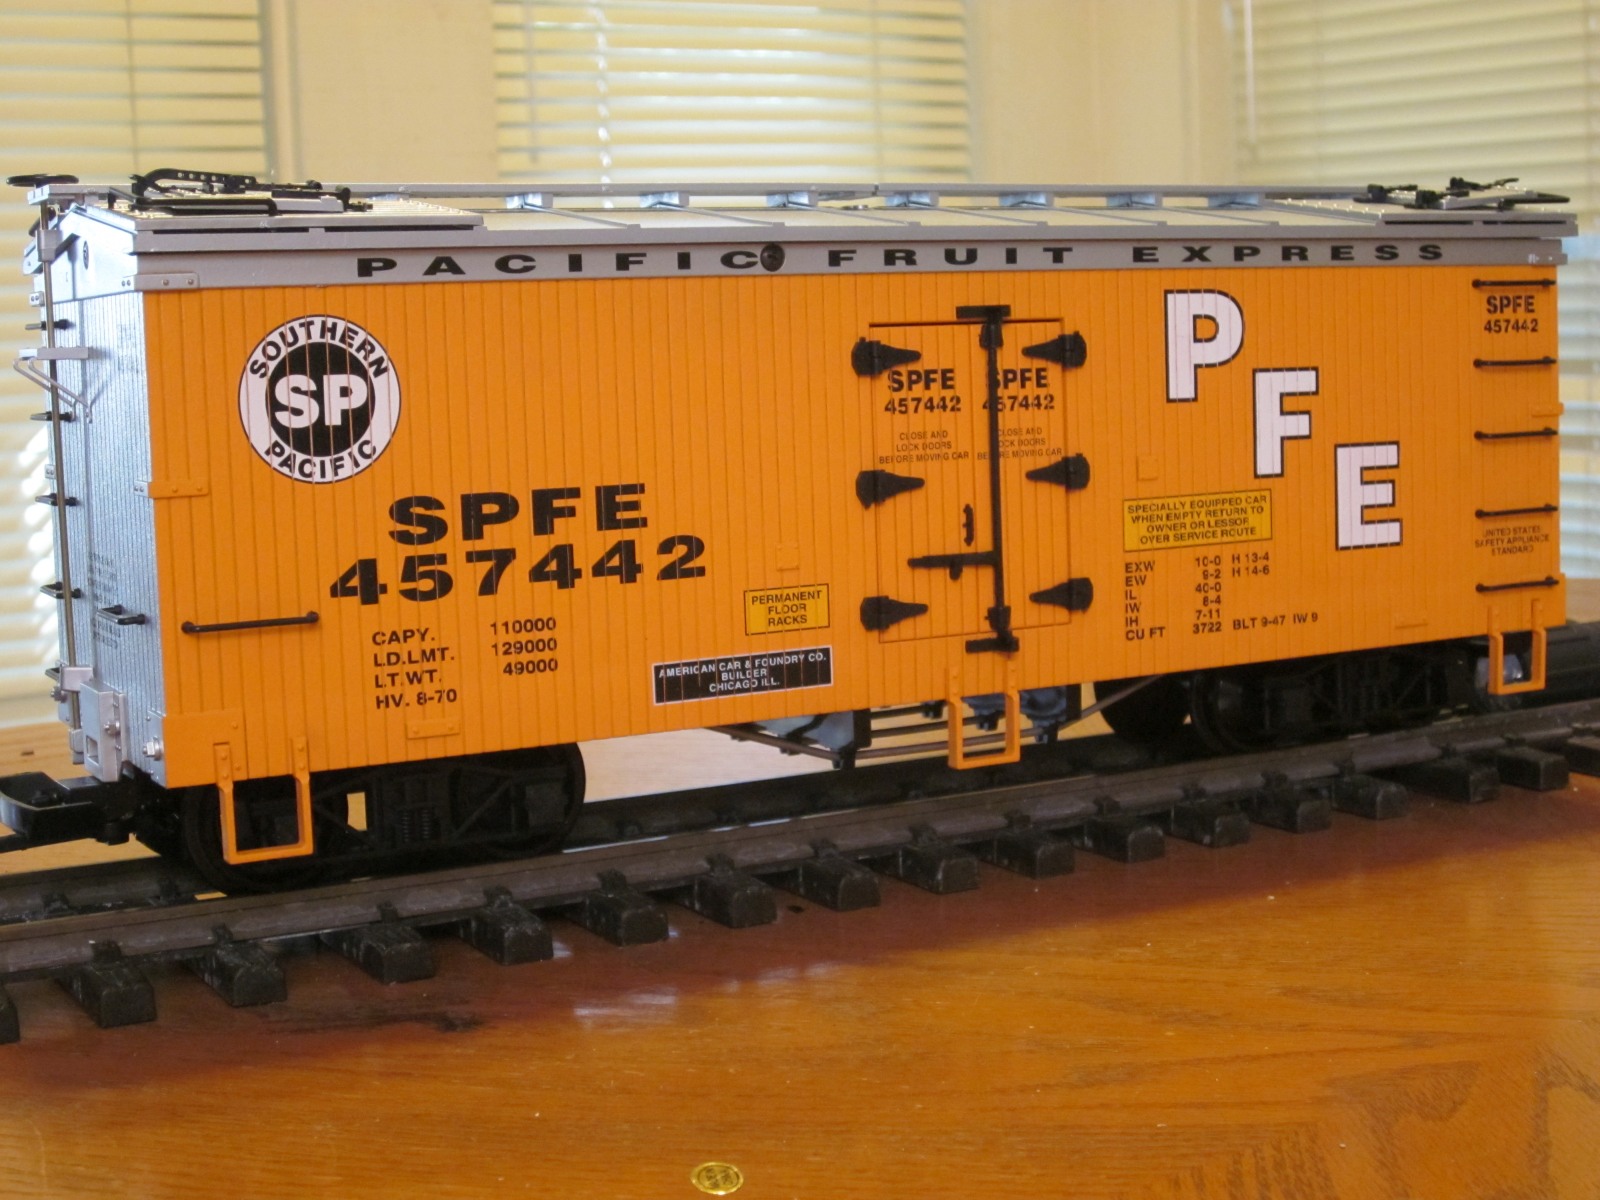 R16202B Southern Pacific PFE SPFE 457442